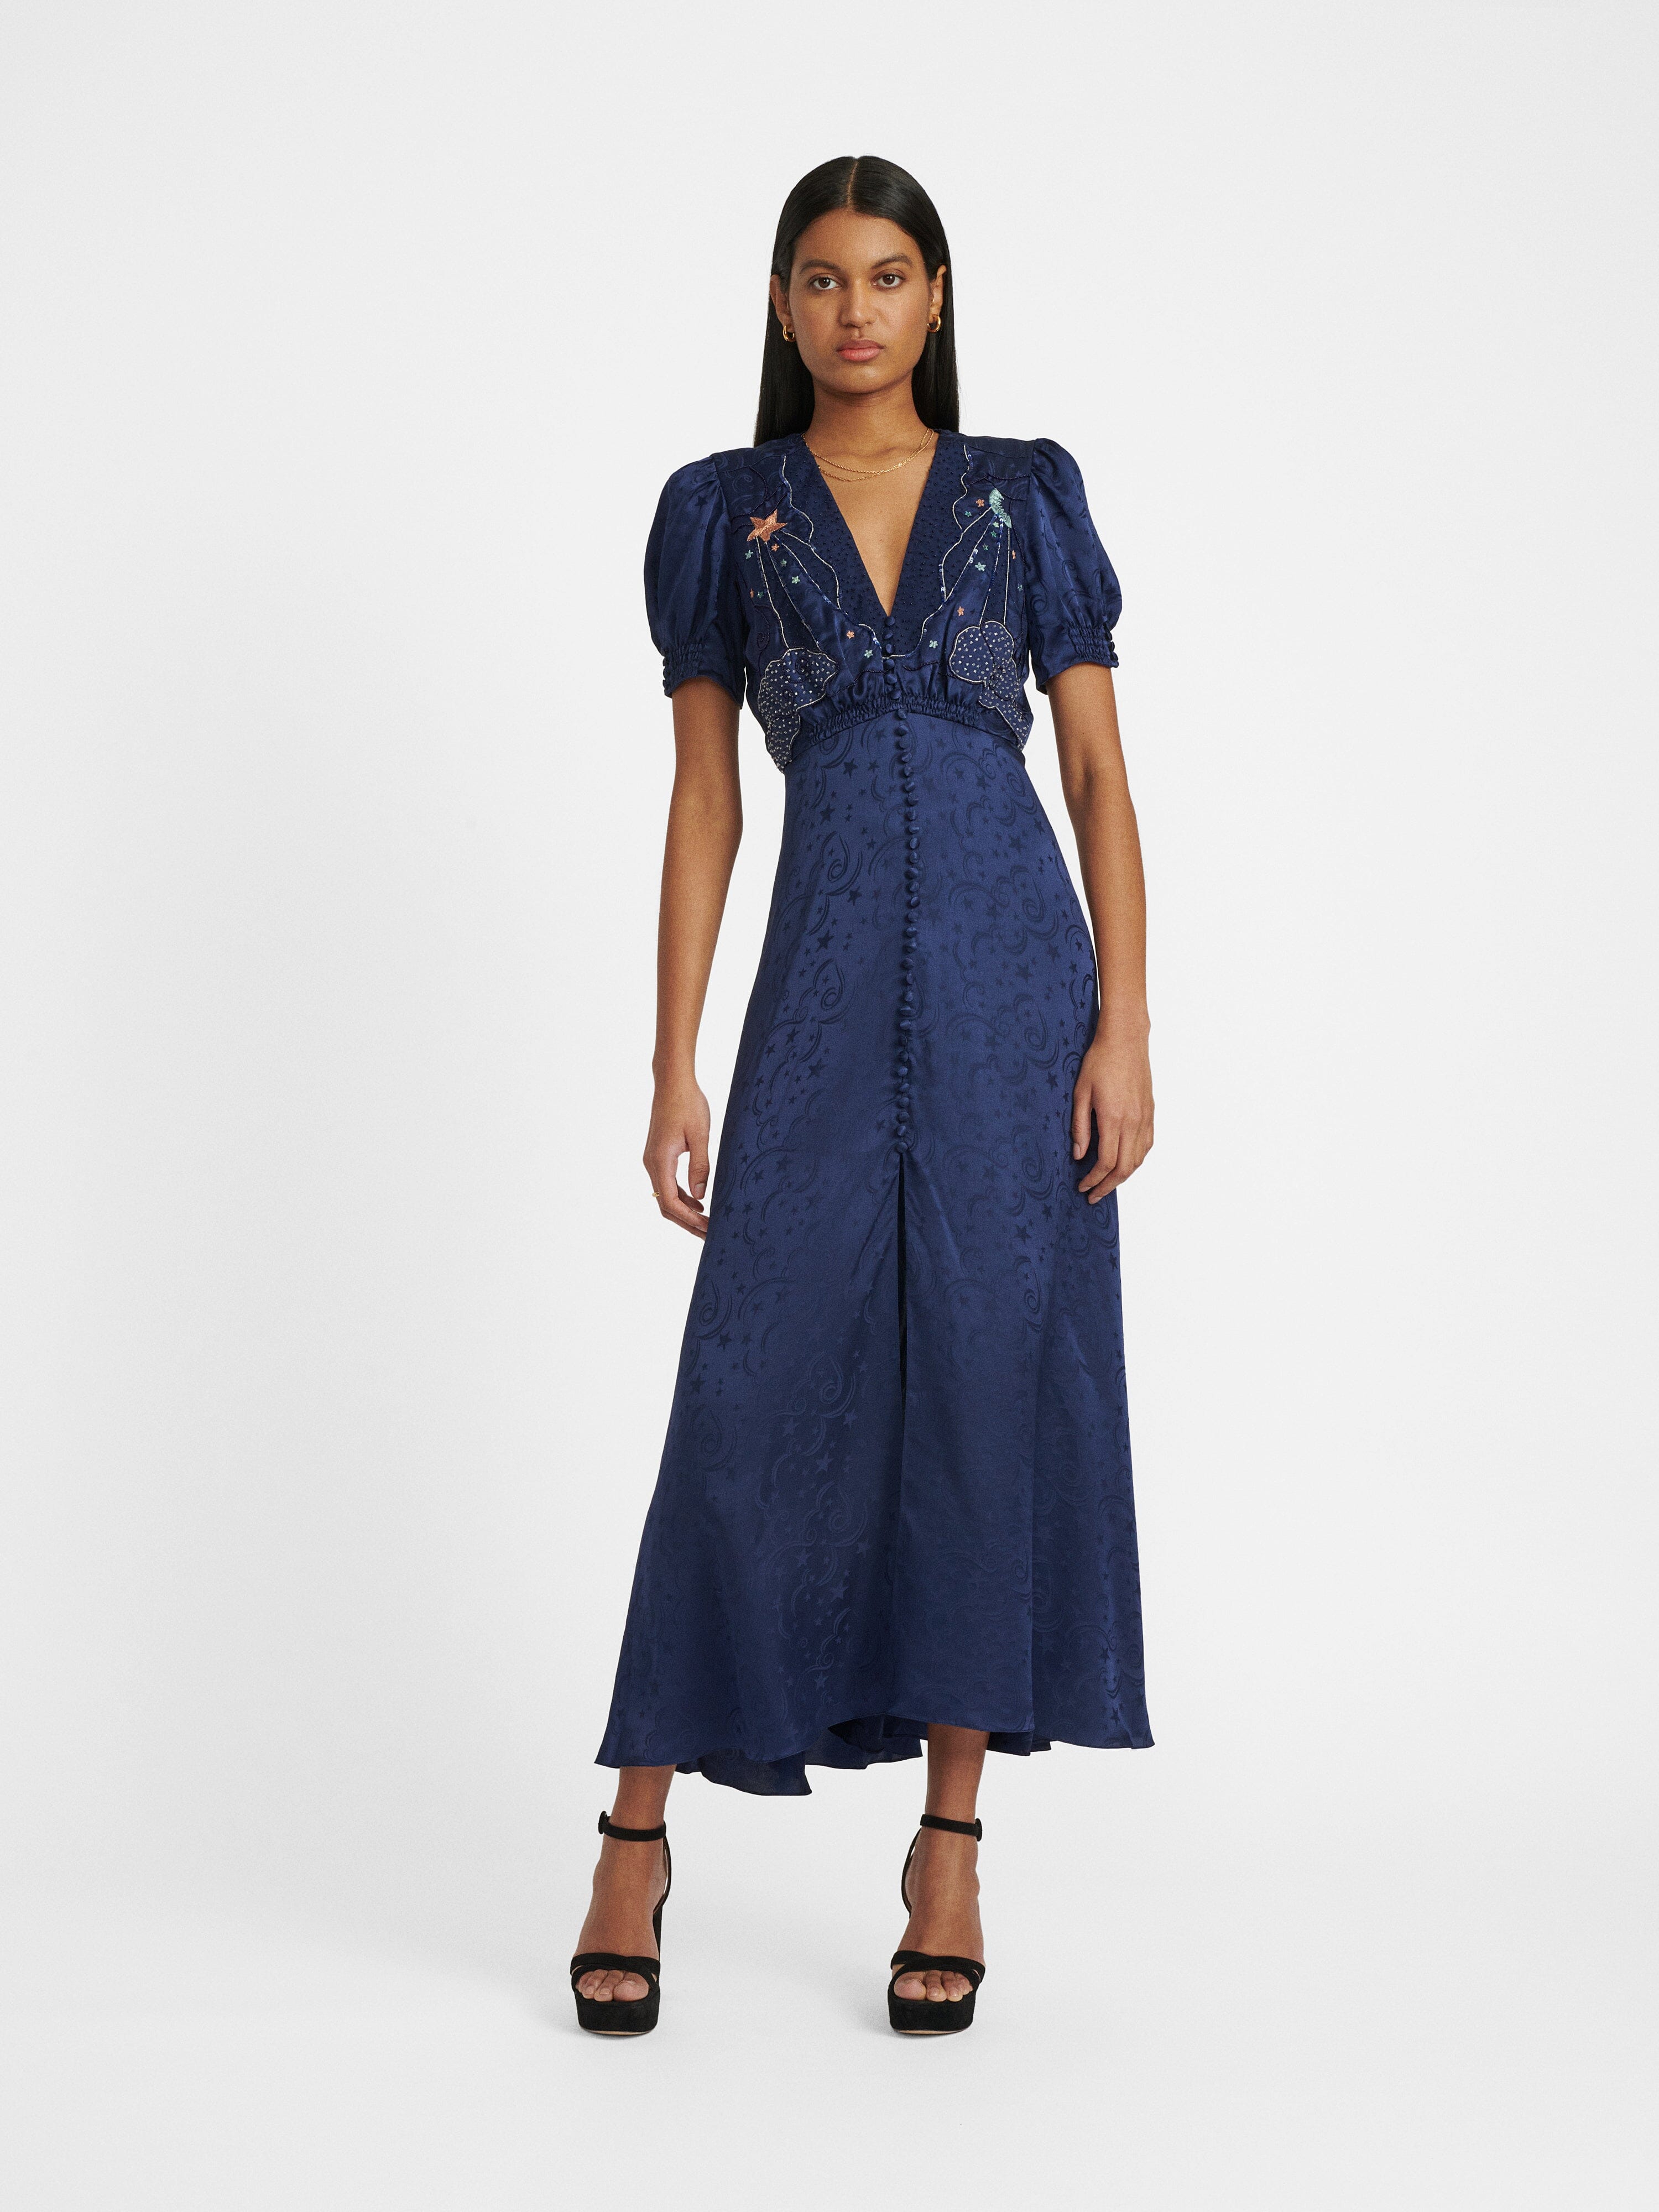 Venyx Lea Long Dress in Navy Astro Embroidered